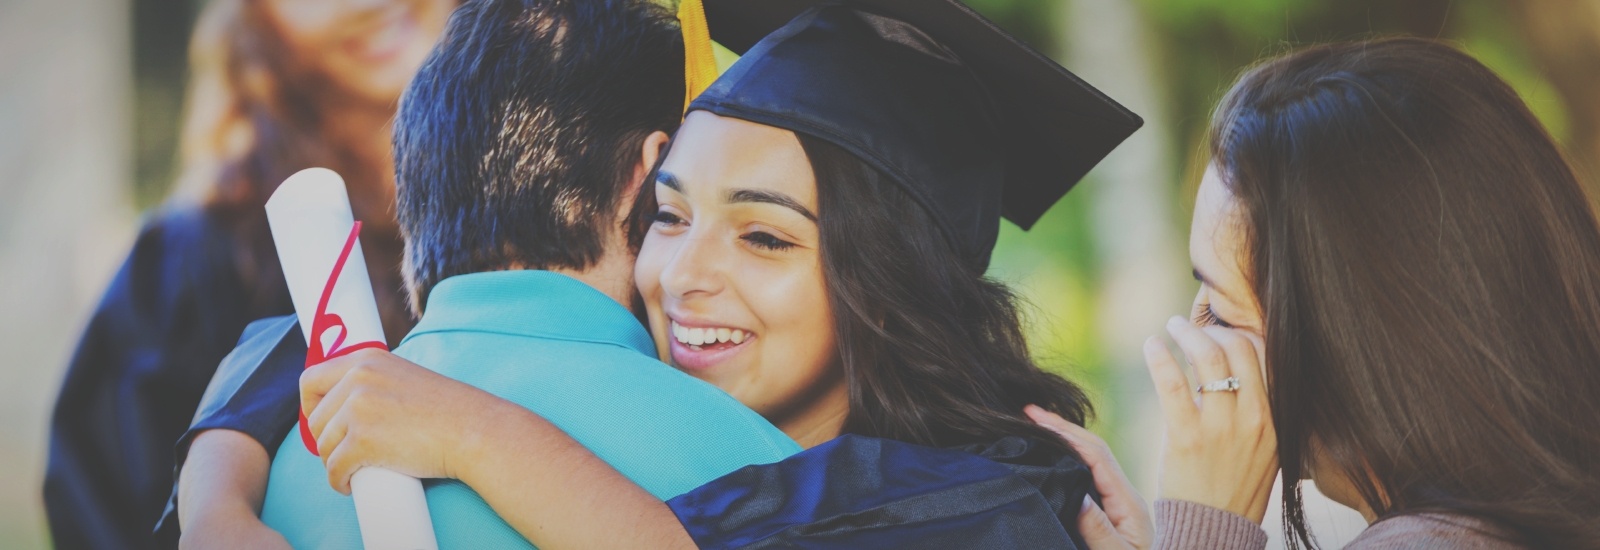 College-graduate-hugs-dad-while-mom-watches-proudly-613884704_5760x3840-768052-edited-3